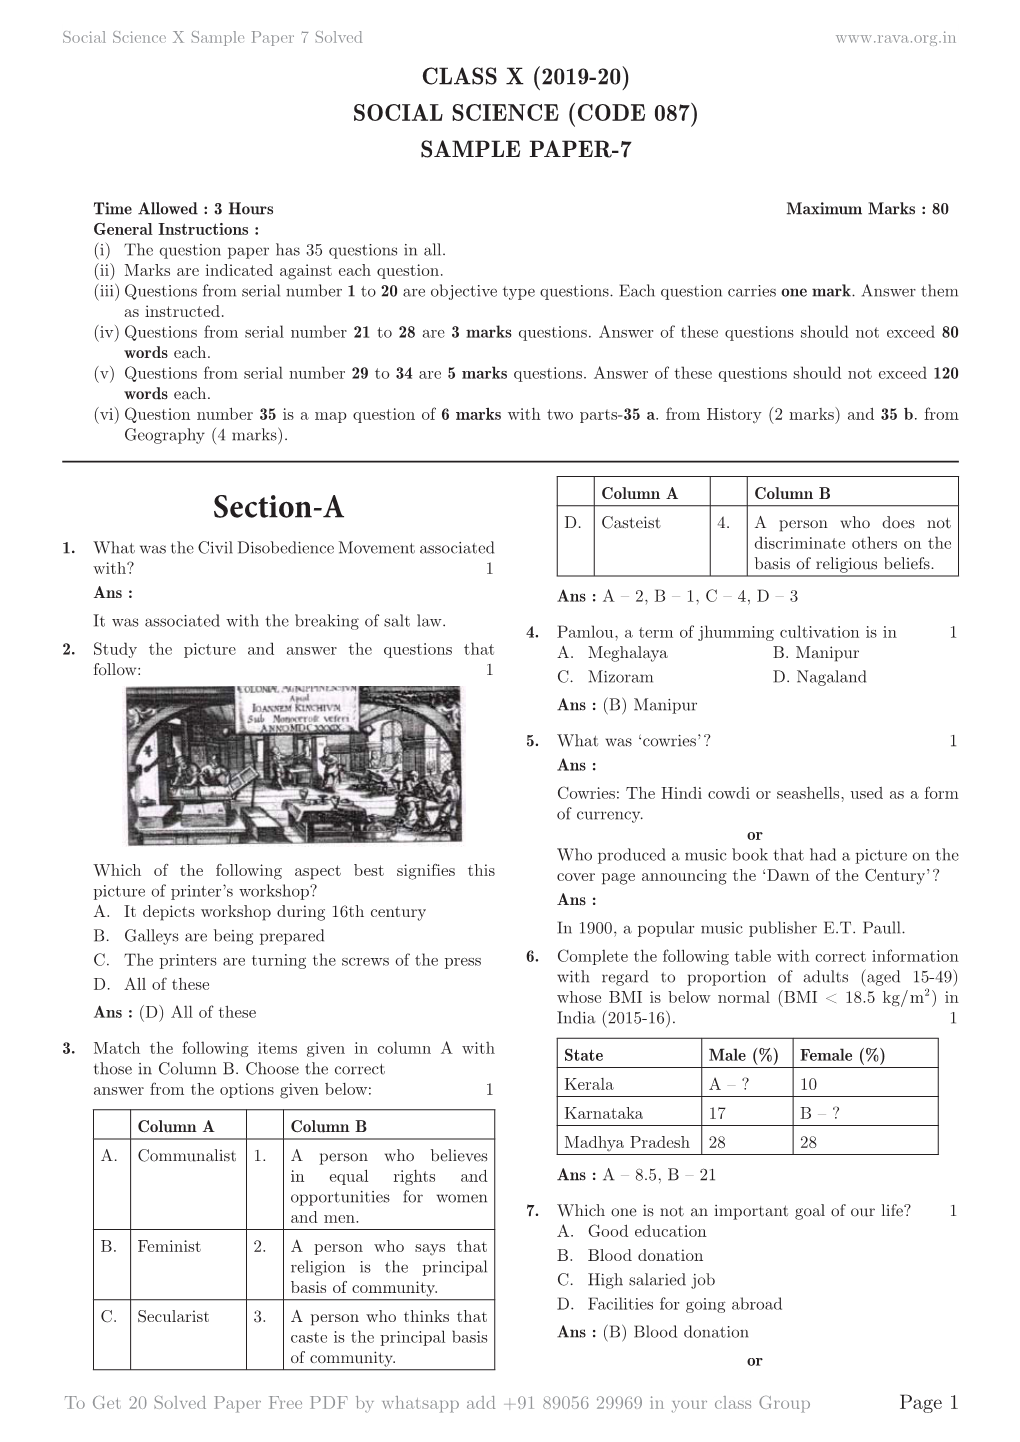 Solved Paper Free PDF by Whatsapp Add +91 89056 29969 in Your Class Group Page 1 Social Science X Sample Paper 7 Solved